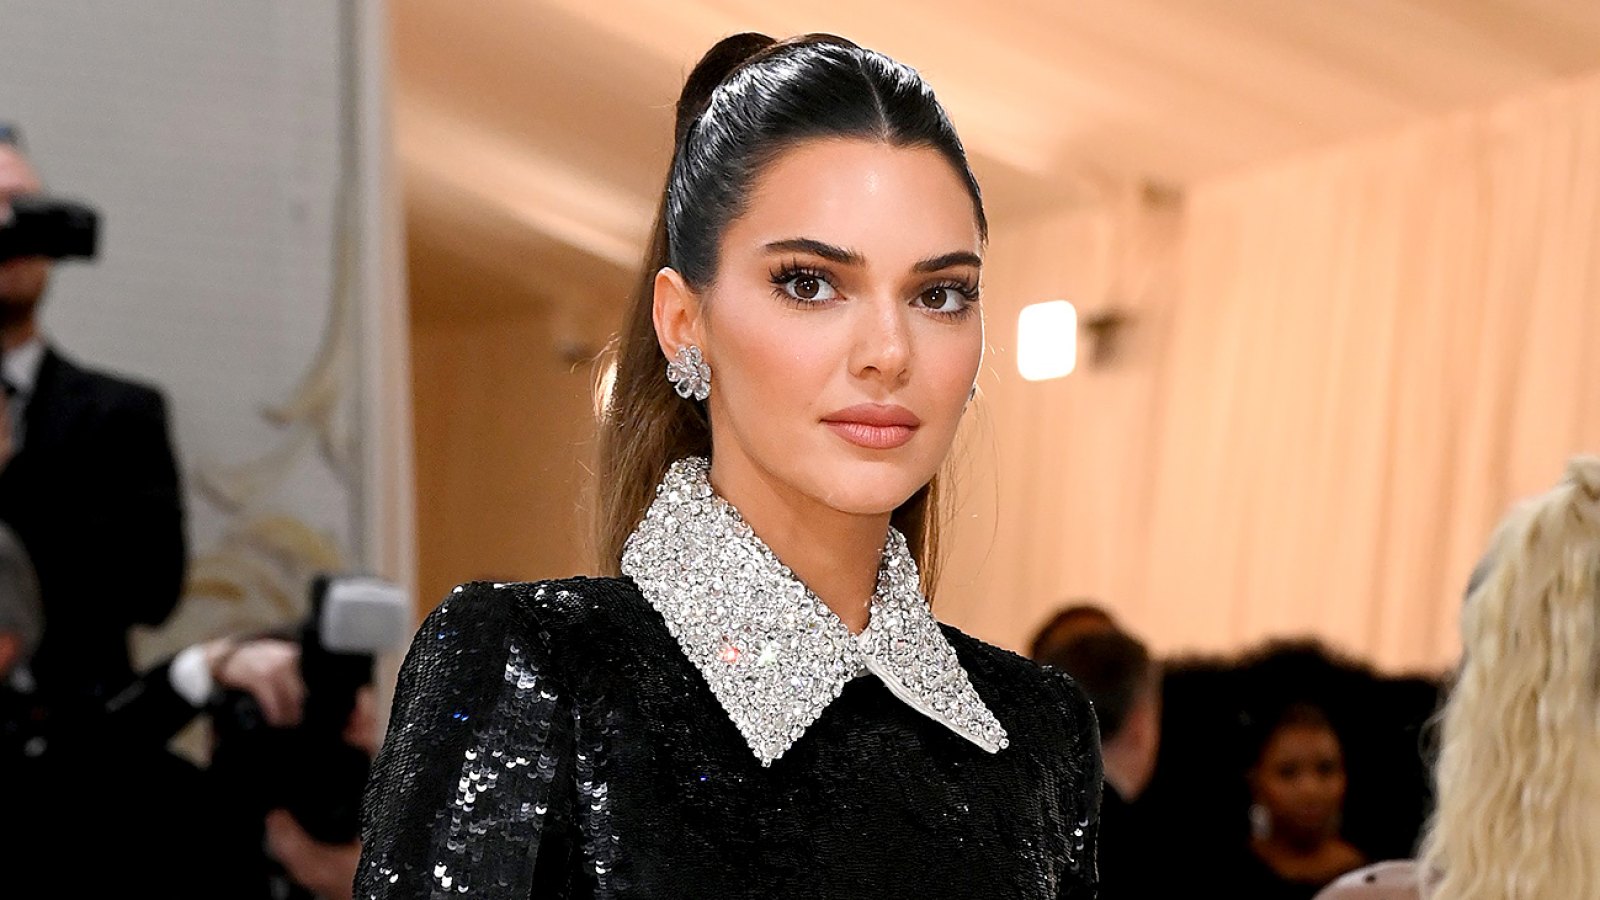 This Is The New Designer It Bag Loved By Kendall Jenner